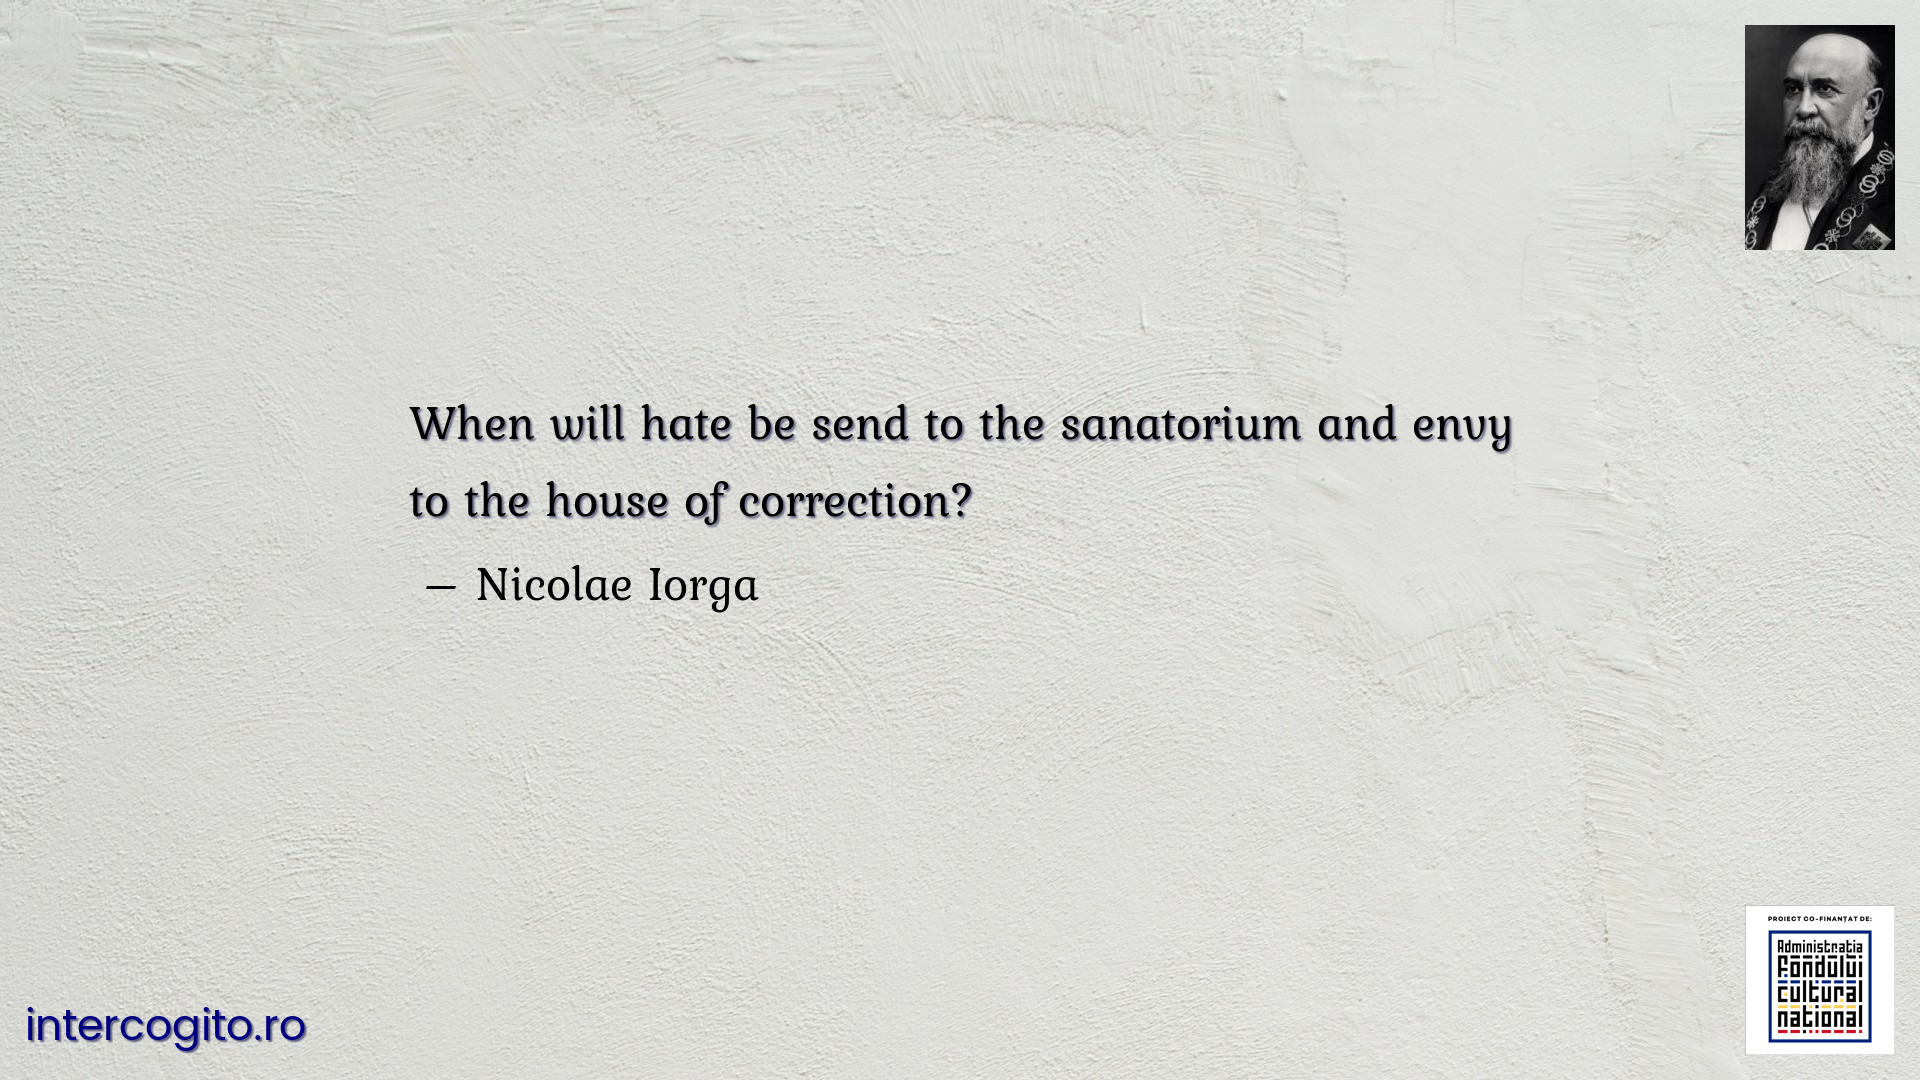 When will hate be send to the sanatorium and envy to the house of correction?